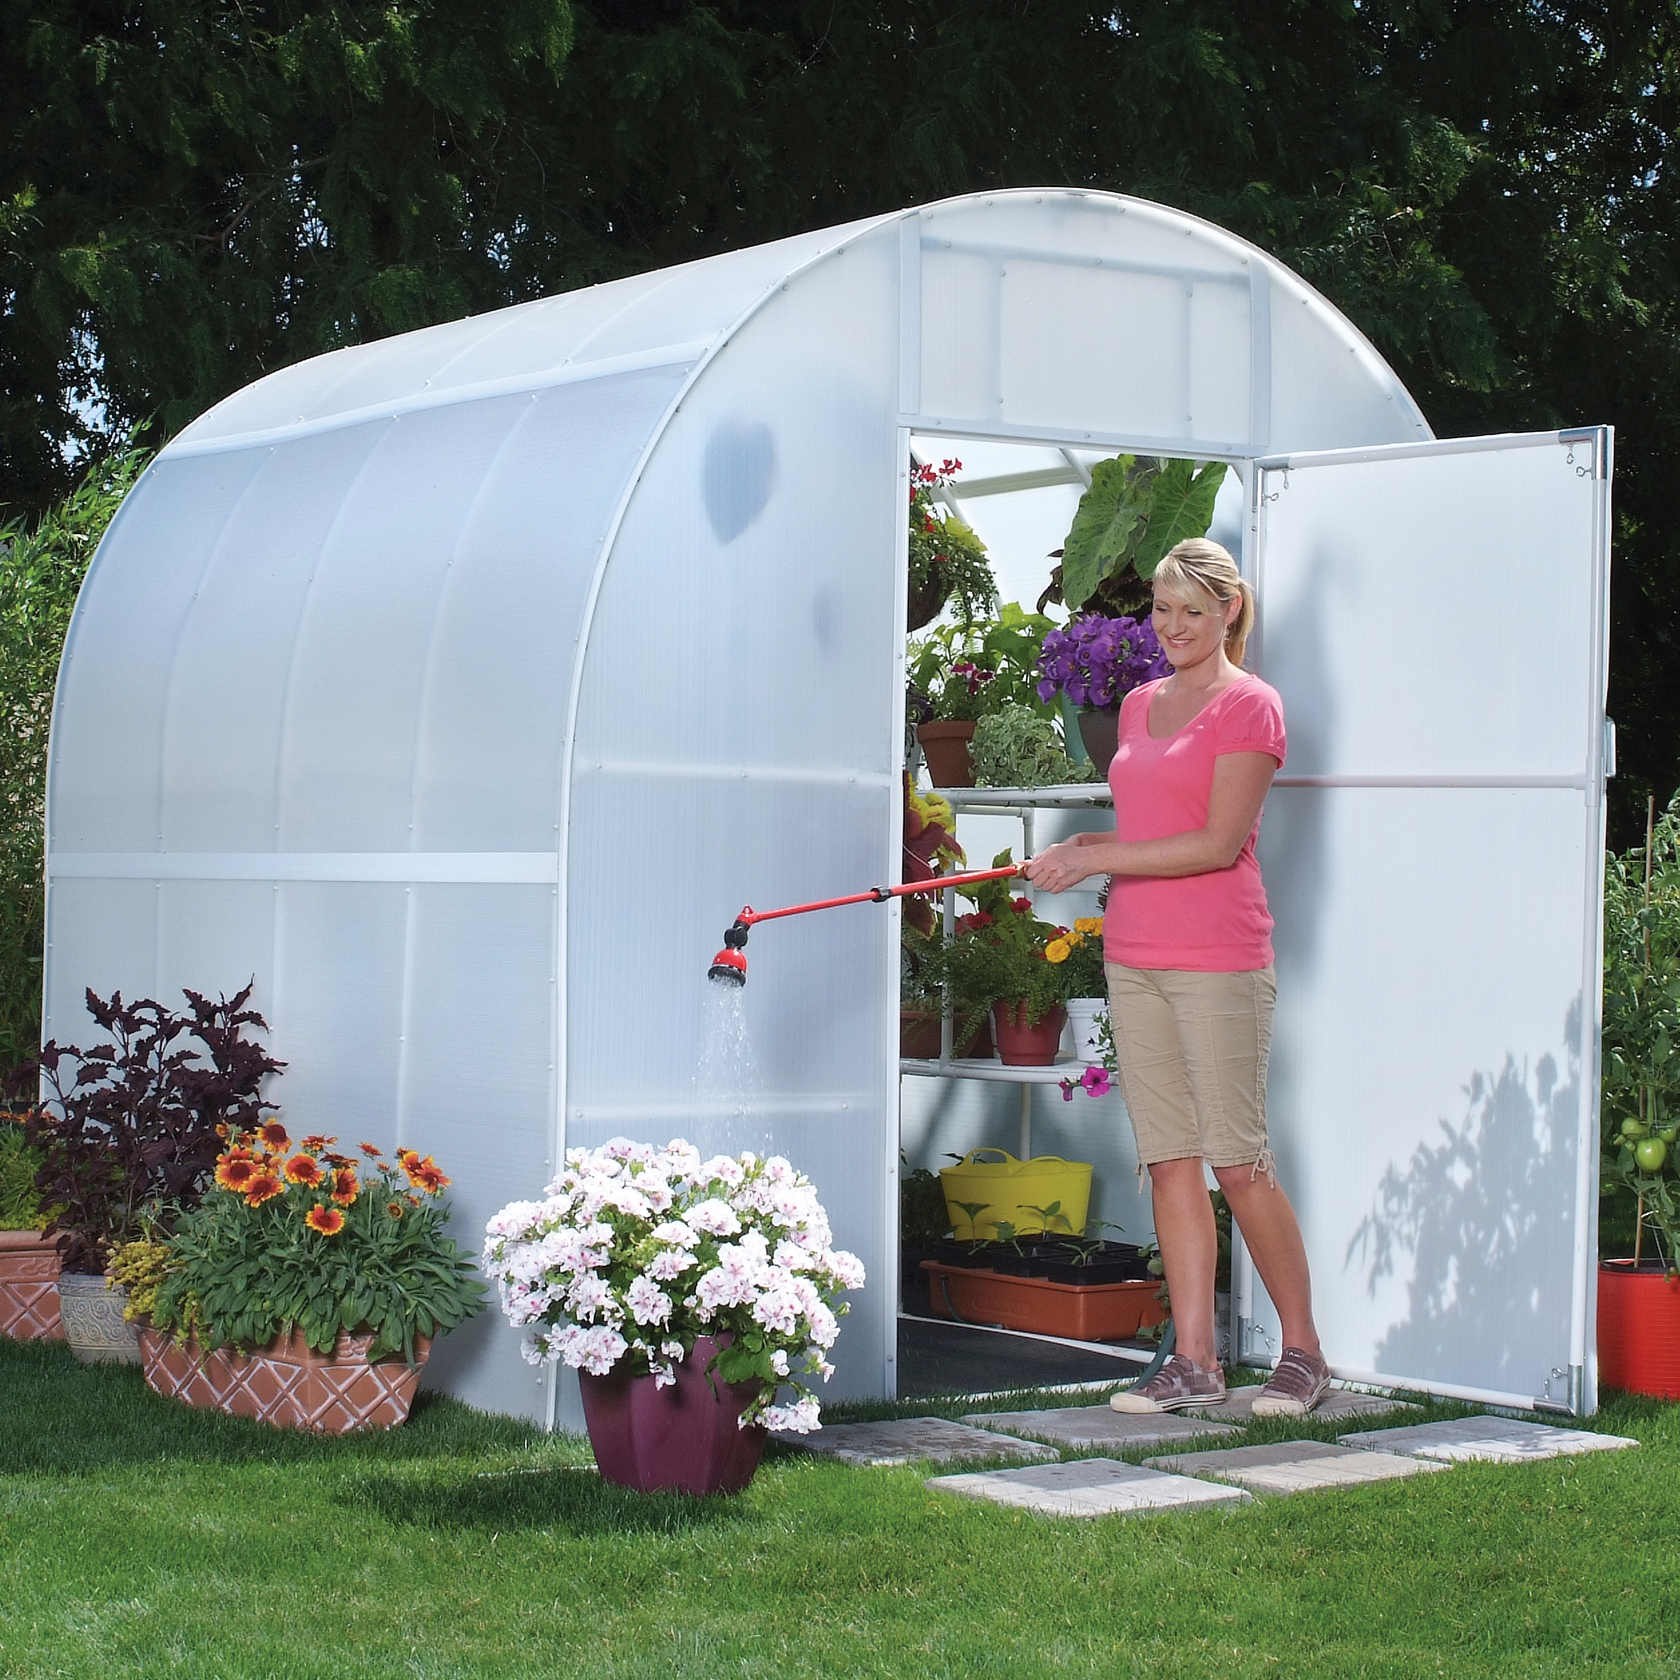 Solexx Greenhouse: A Practical and Effective Solution for Optimal Plant Growth